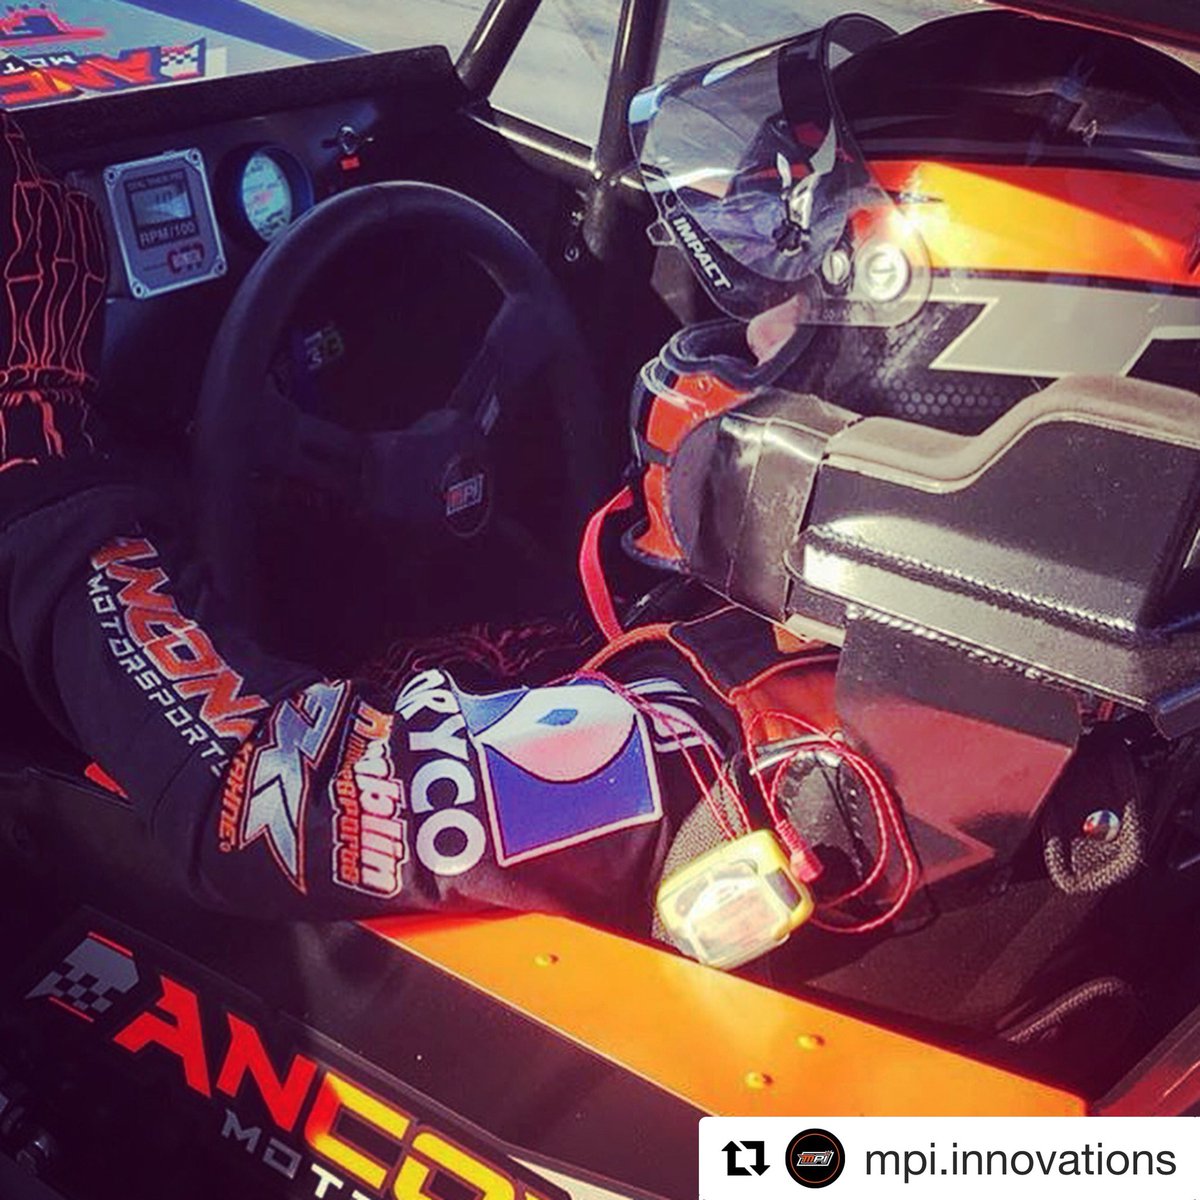 Do you know that the #mpidifference is the official steering wheel of the @KingofCalseries?! 😉🏆🤴🏻🏁
If you are racing micros on the west coast you should have a look!! #ispympi #mpifamily